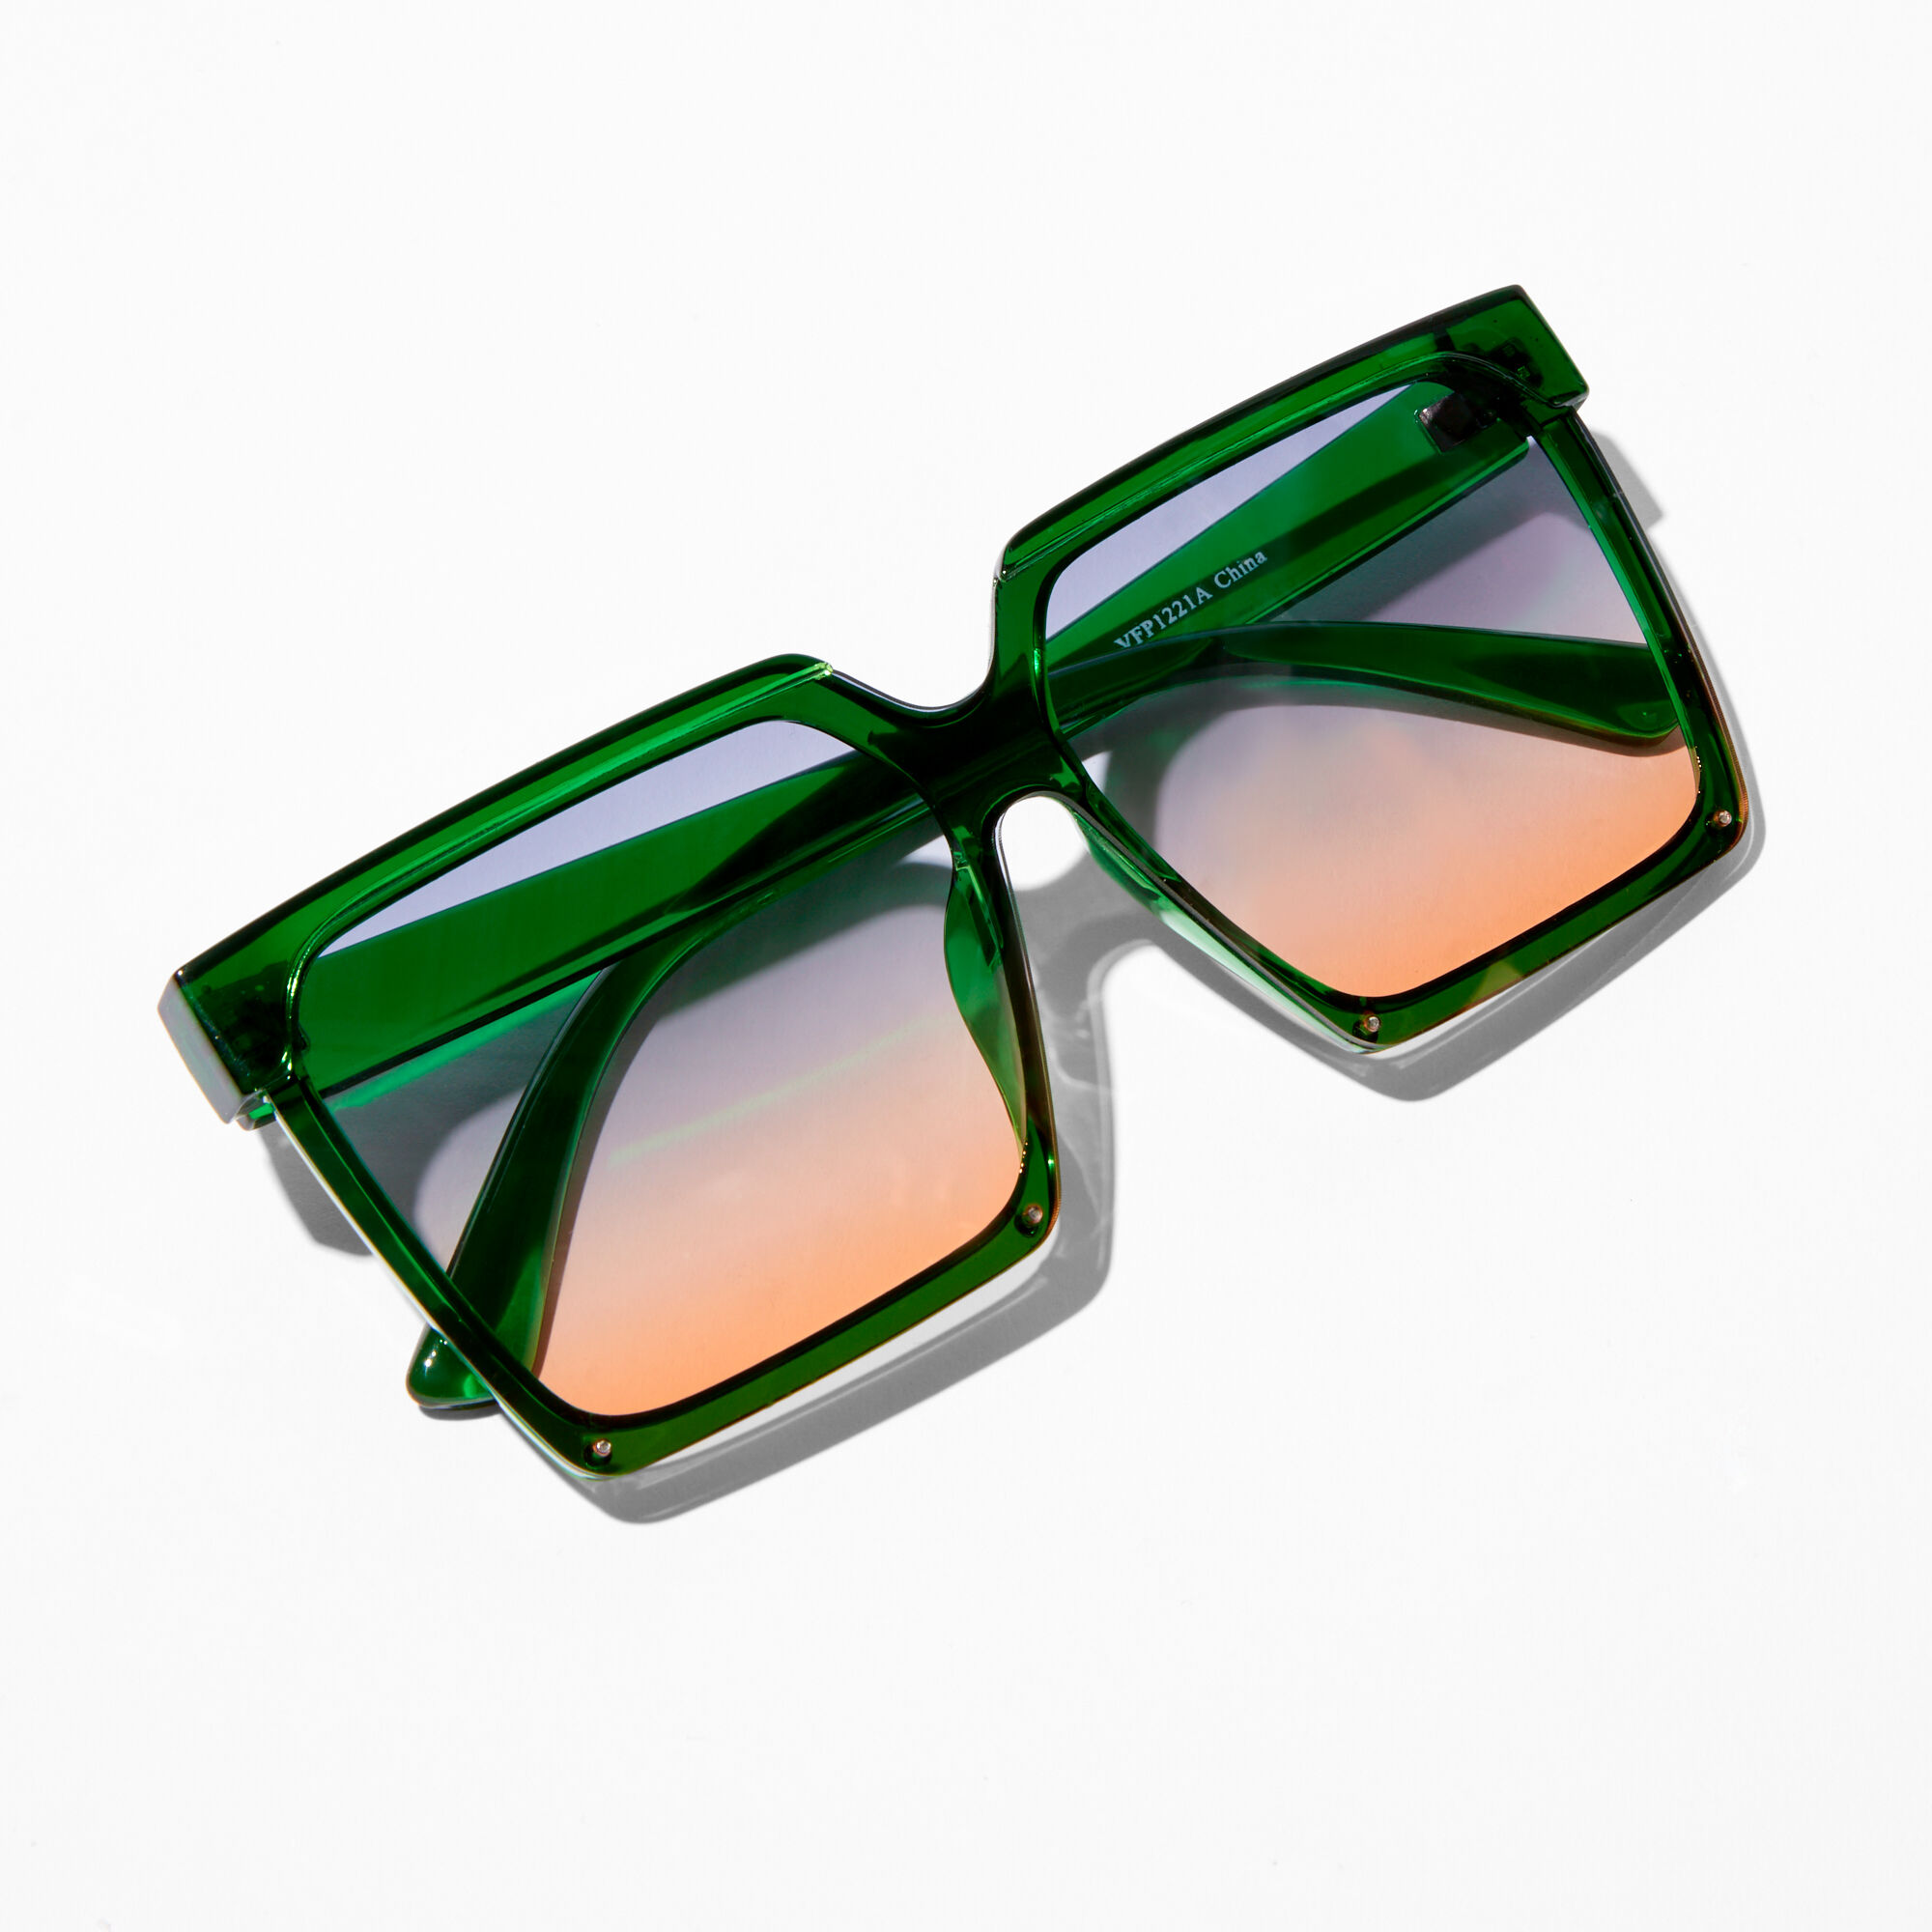 Premium Photo | A green pair of sunglasses with a black strap